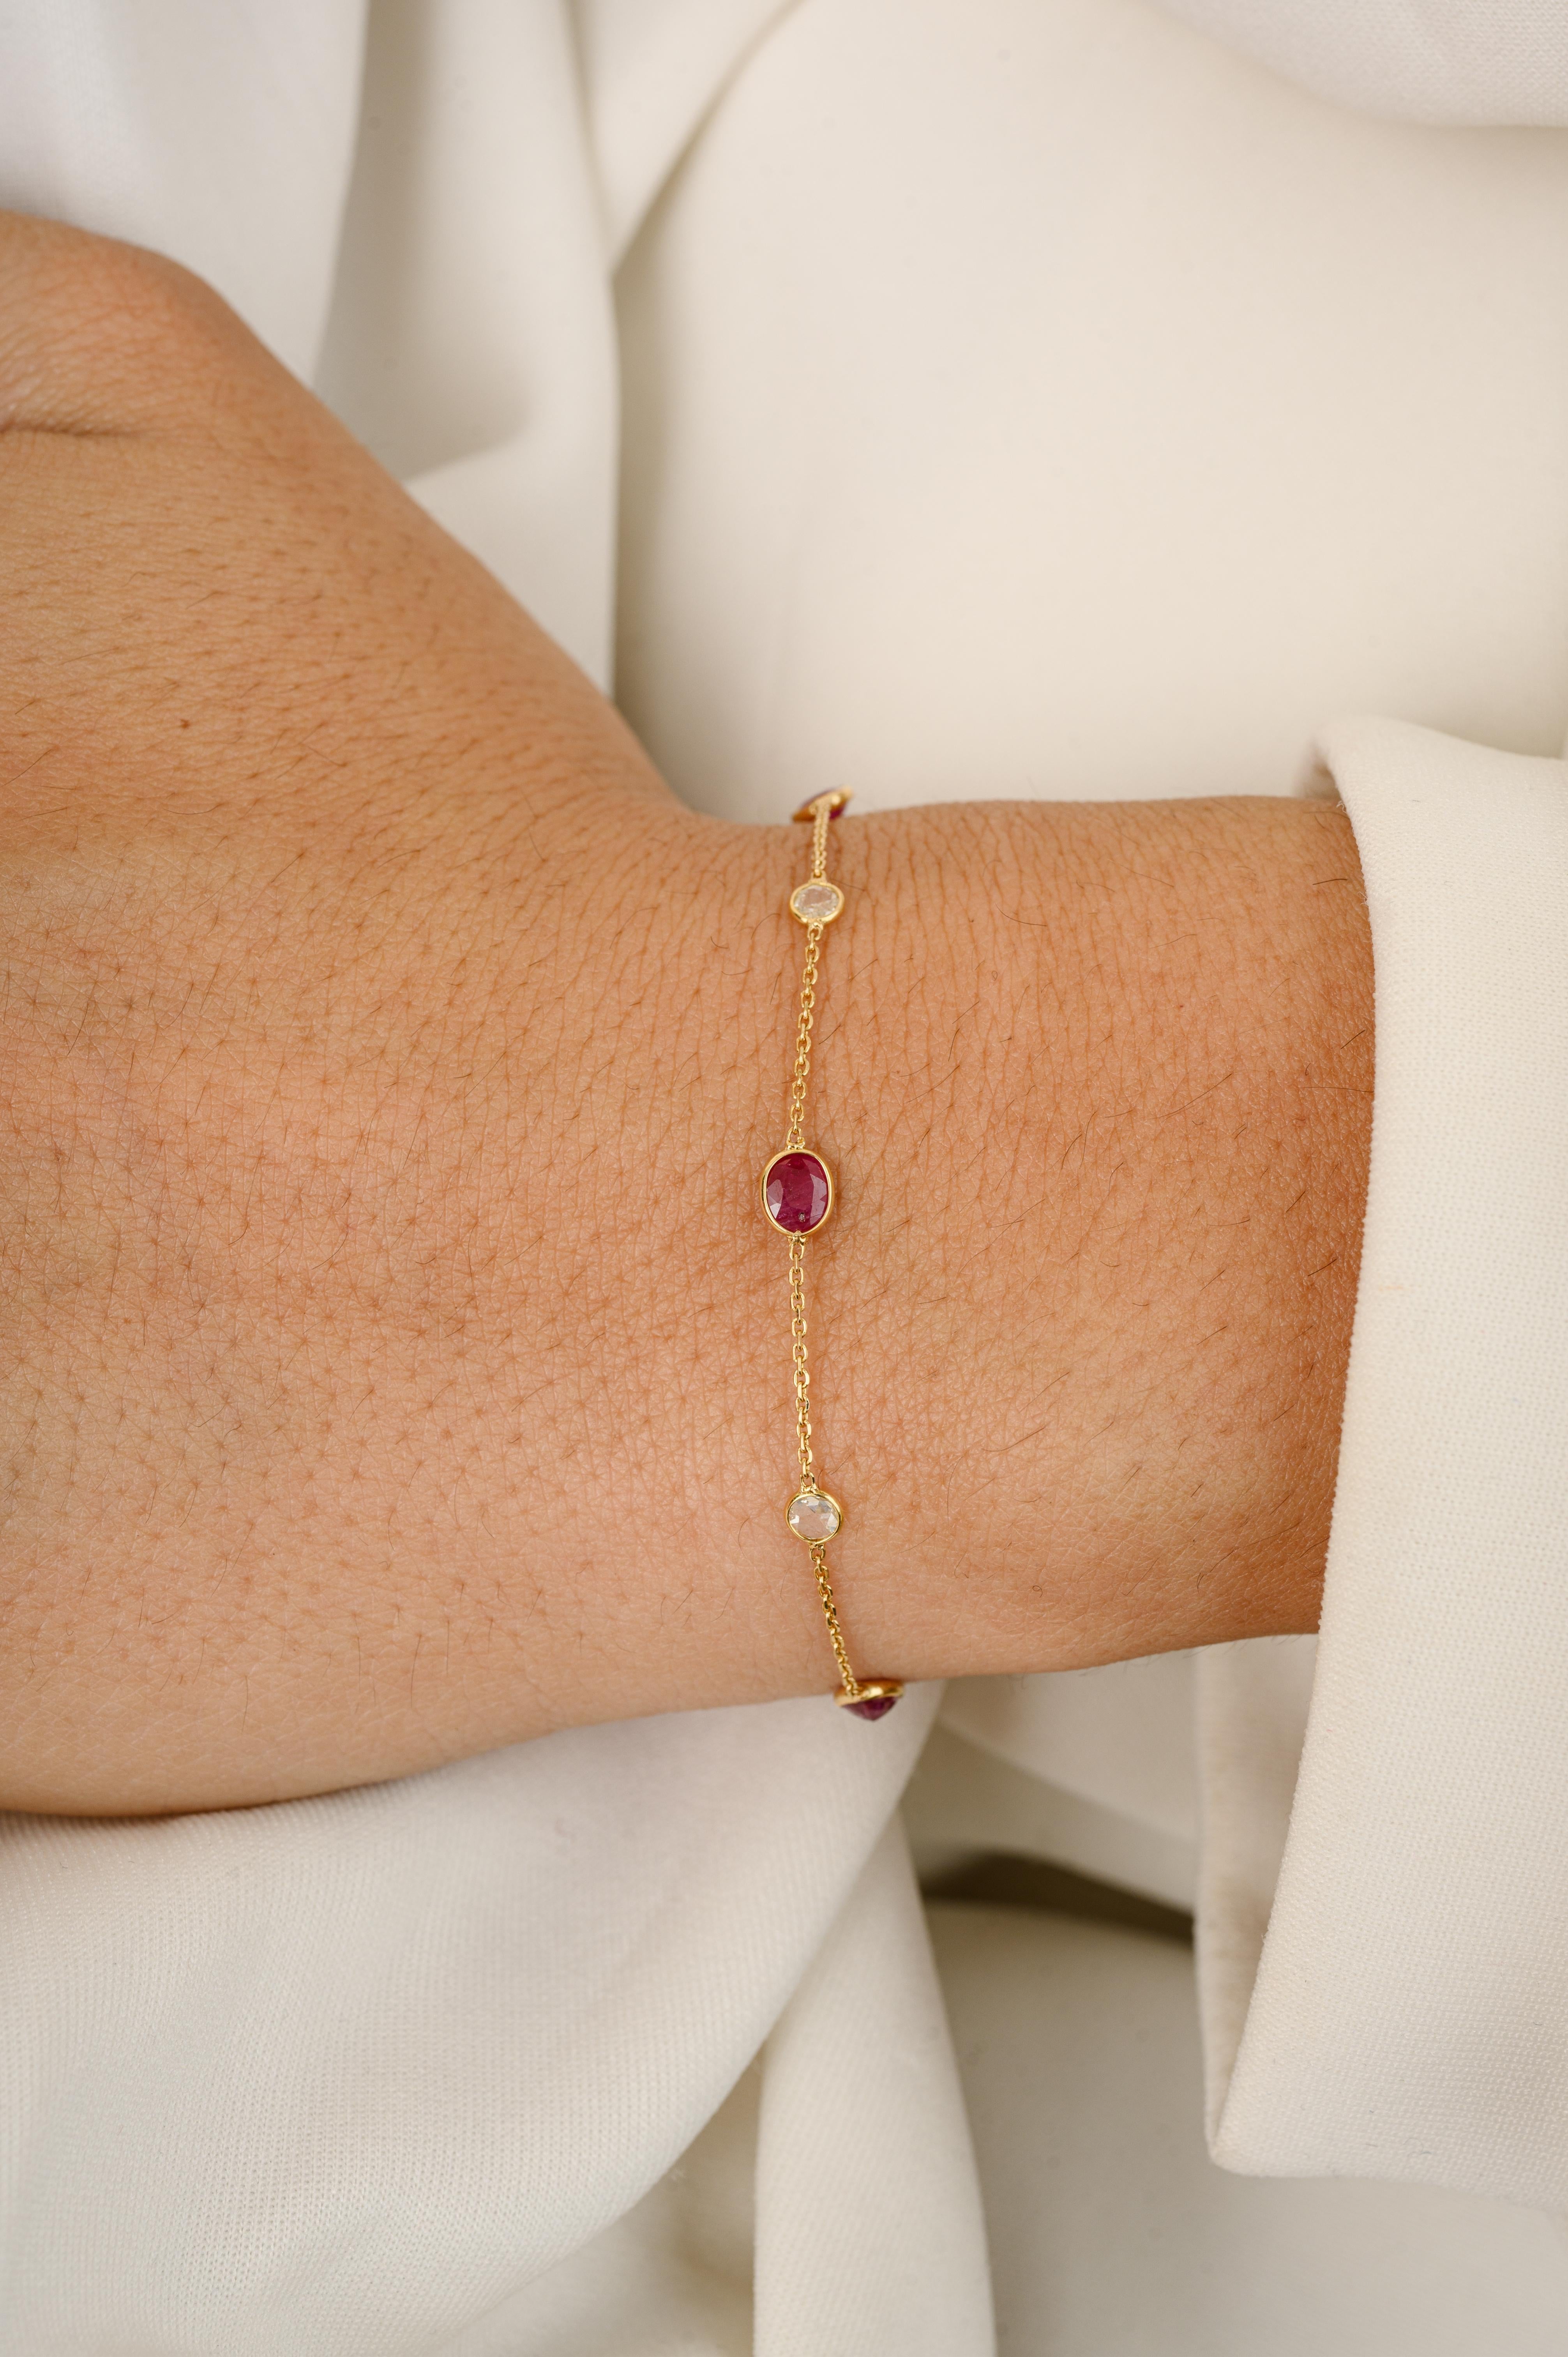 This Minimal Natural Ruby Diamond Chain Bracelet in 18K gold showcases 0.32 carats endlessly sparkling natural ruby and 0.05 carats of diamond. It measures 7 inches long in length. 
Ruby improves mental strength.
Designed with oval cut ruby and